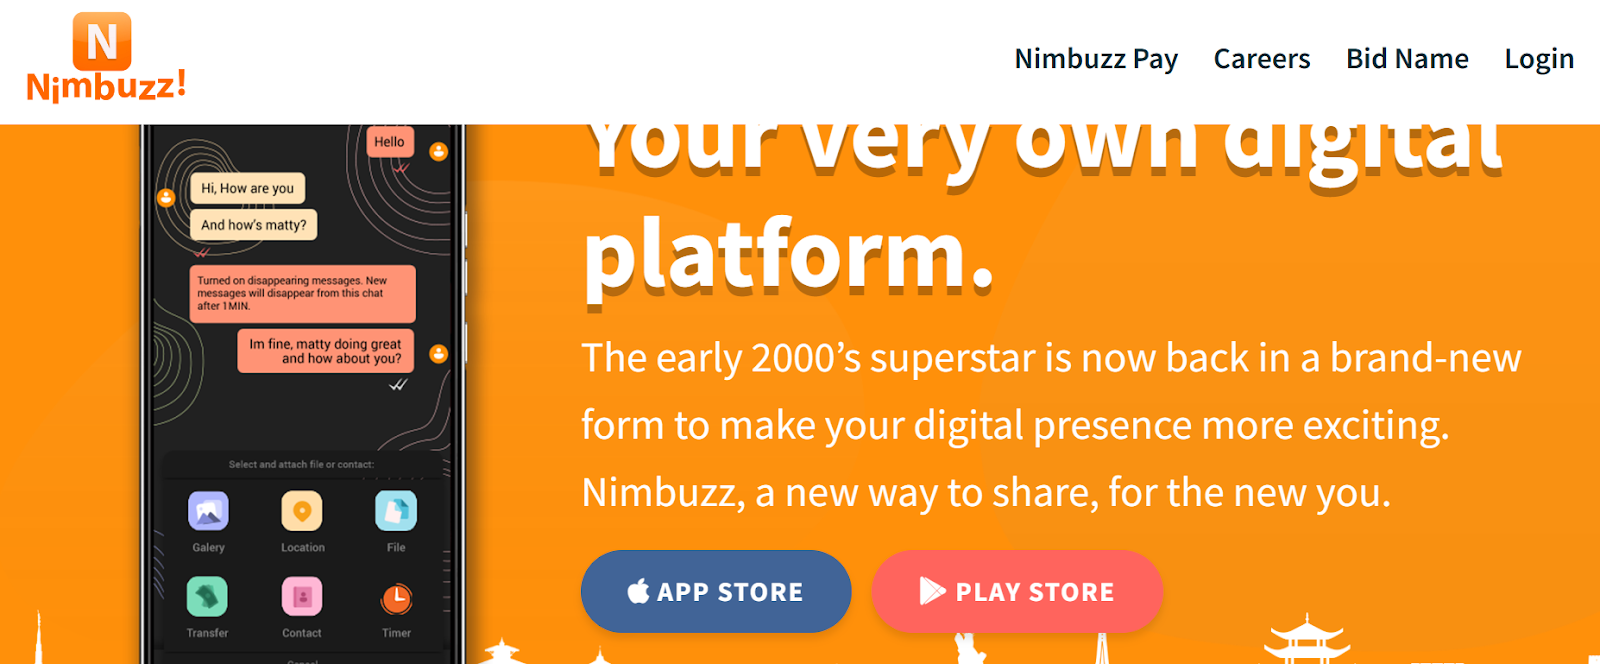 Nimbuzz website snapshot highlighting the services it provides.